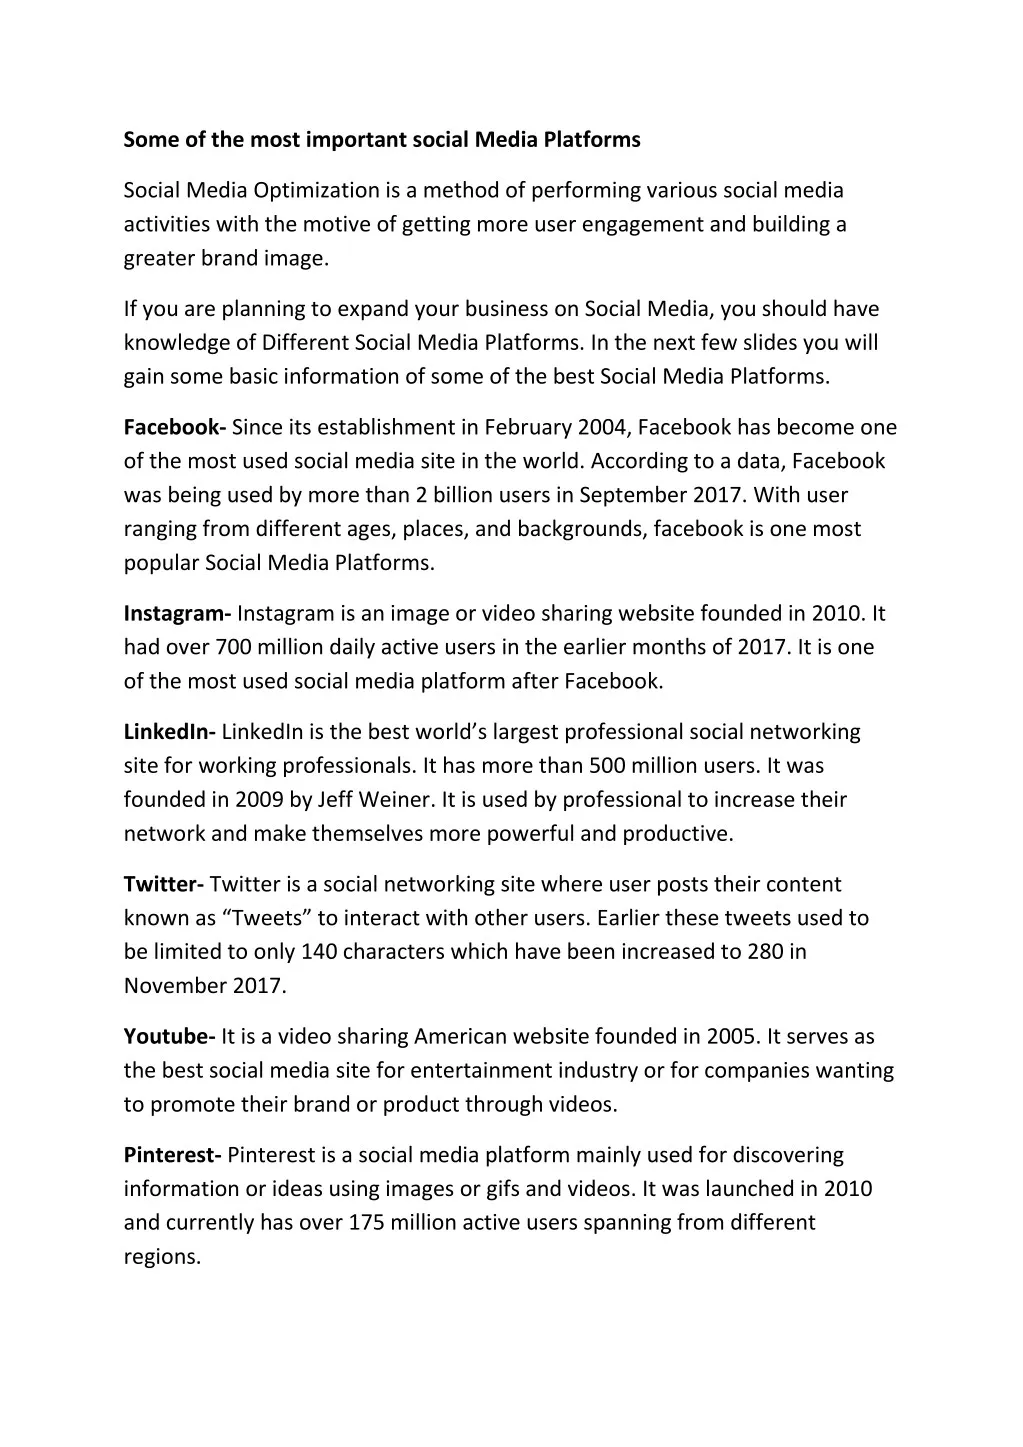 some of the most important social media platforms